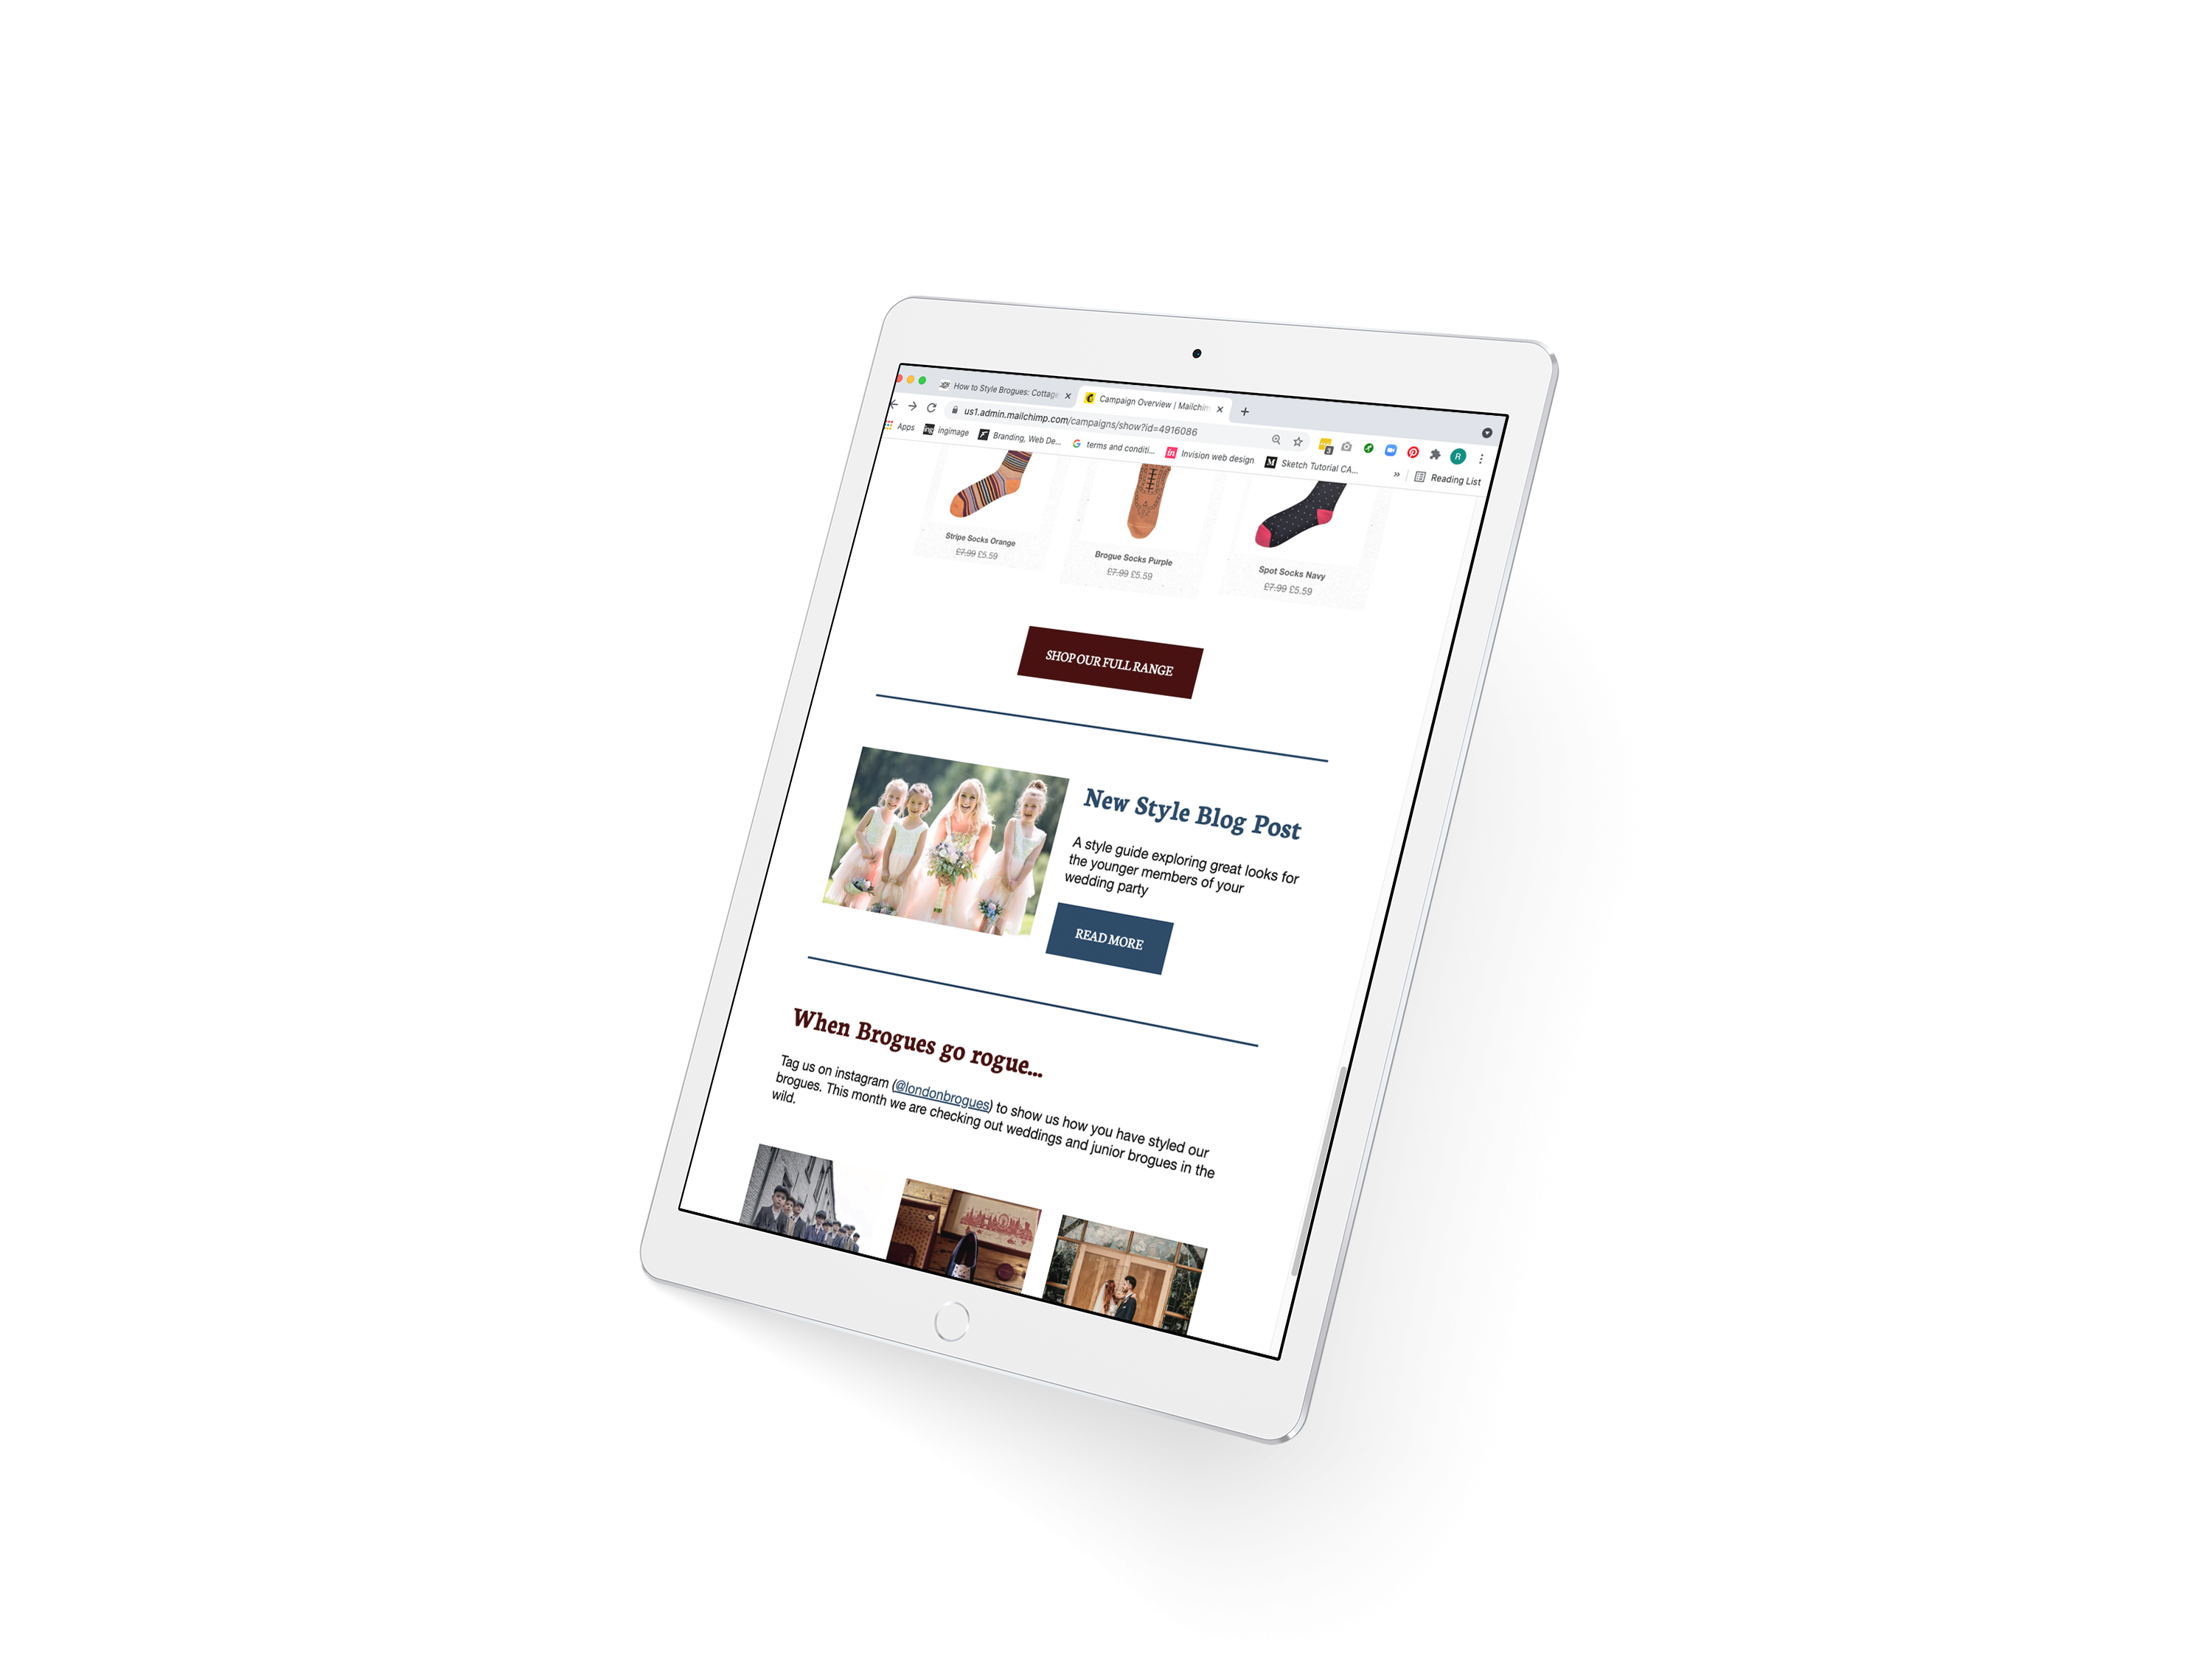 A White Ipad Pro displaying an email newsletter